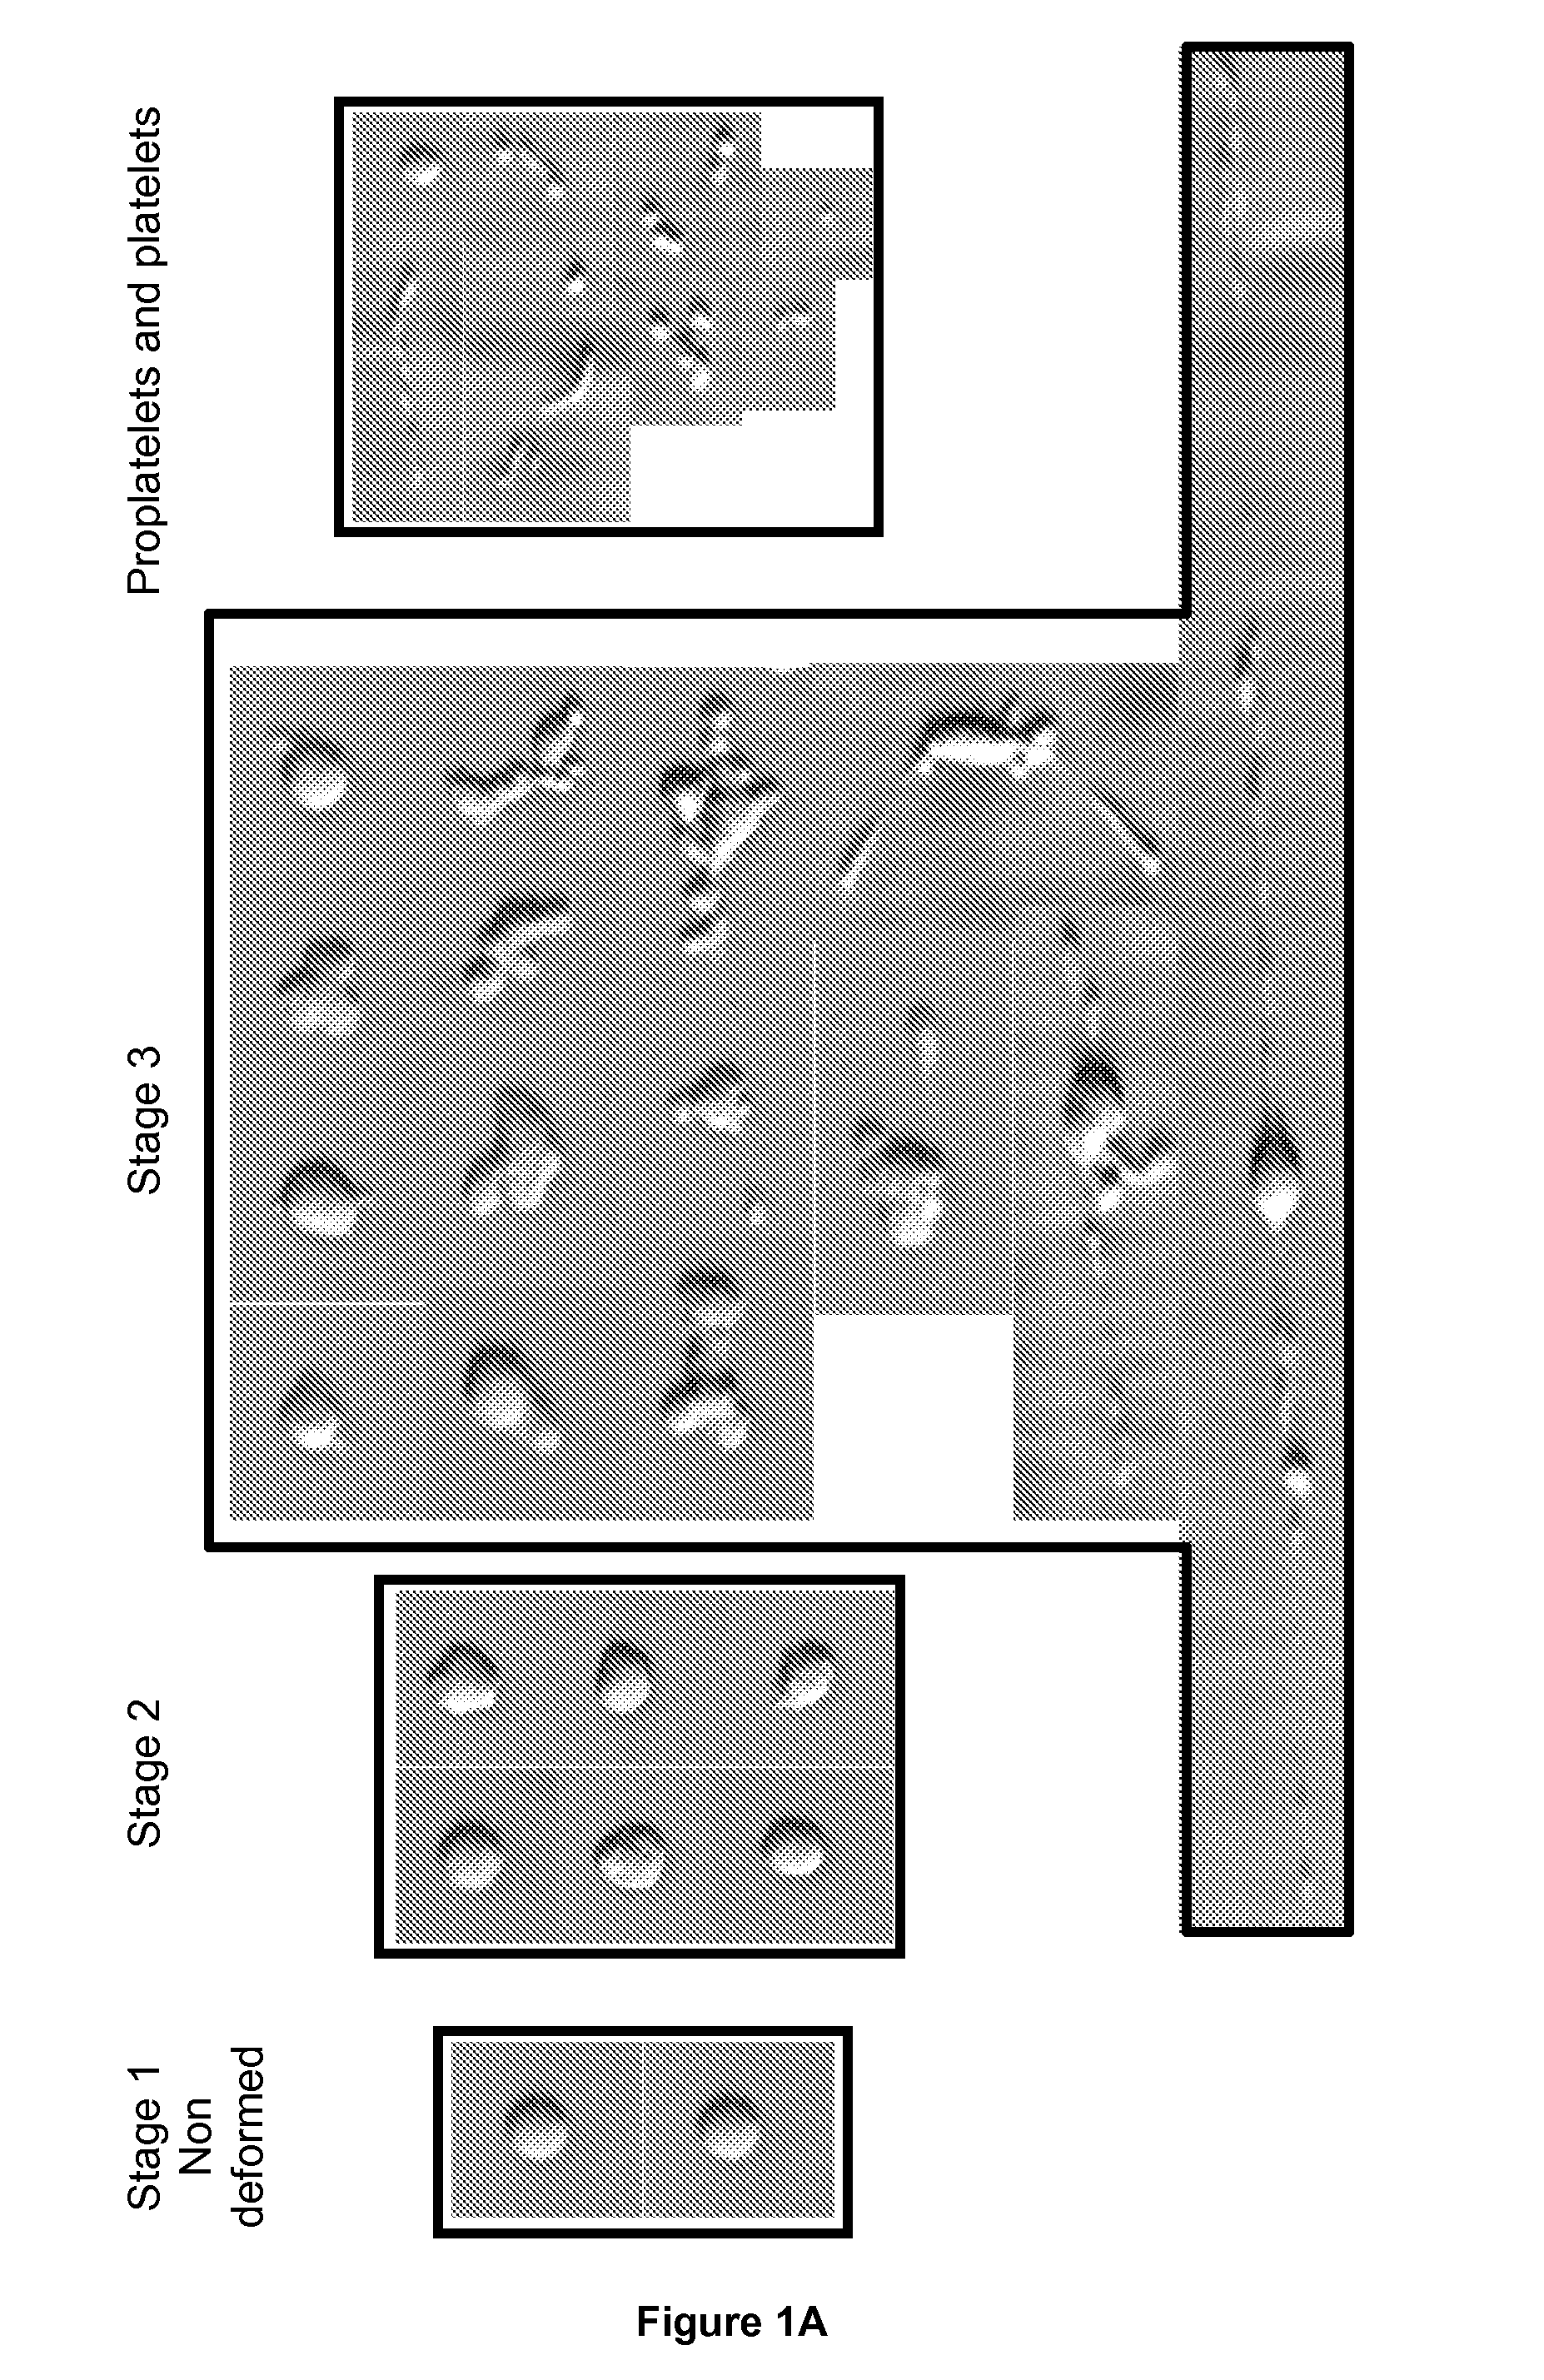 Method for Producing Platelets